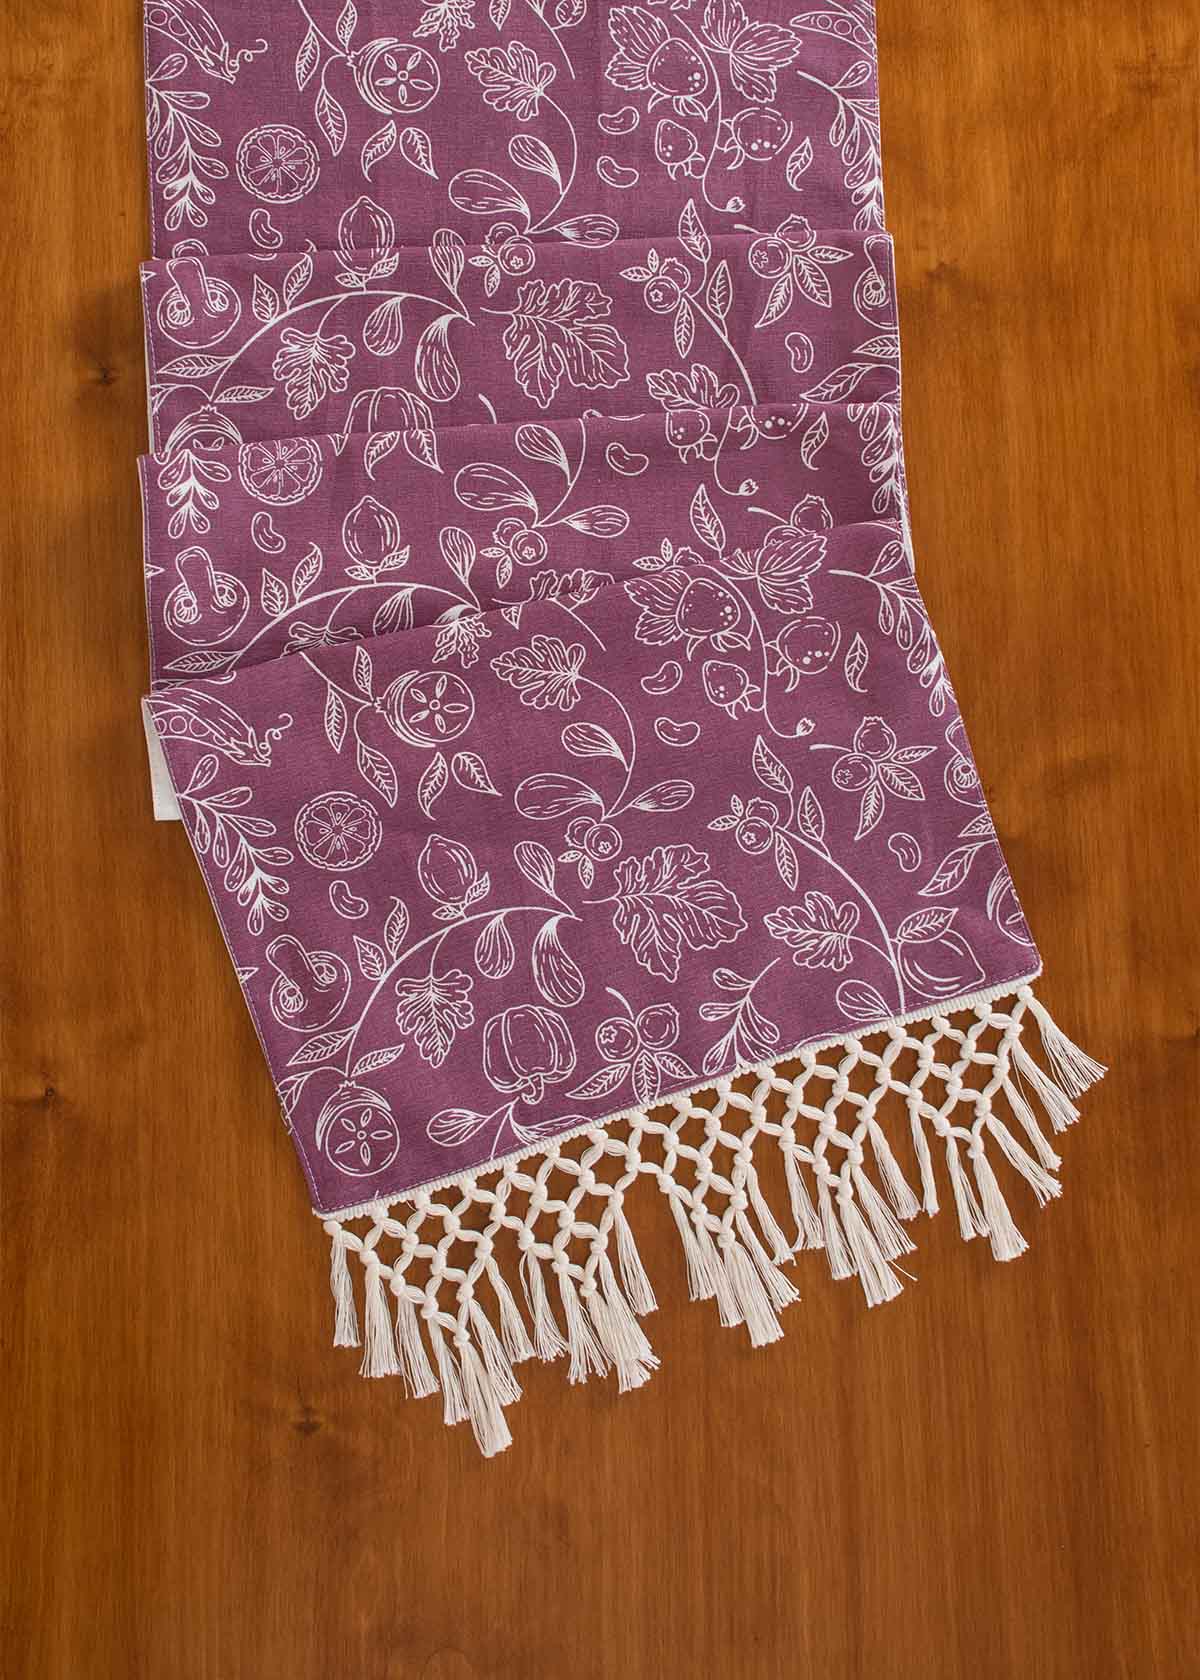 Kitchen Garden 100% cotton floral table runner for 4 seater or 6 seater Dining with tassels - Voilet